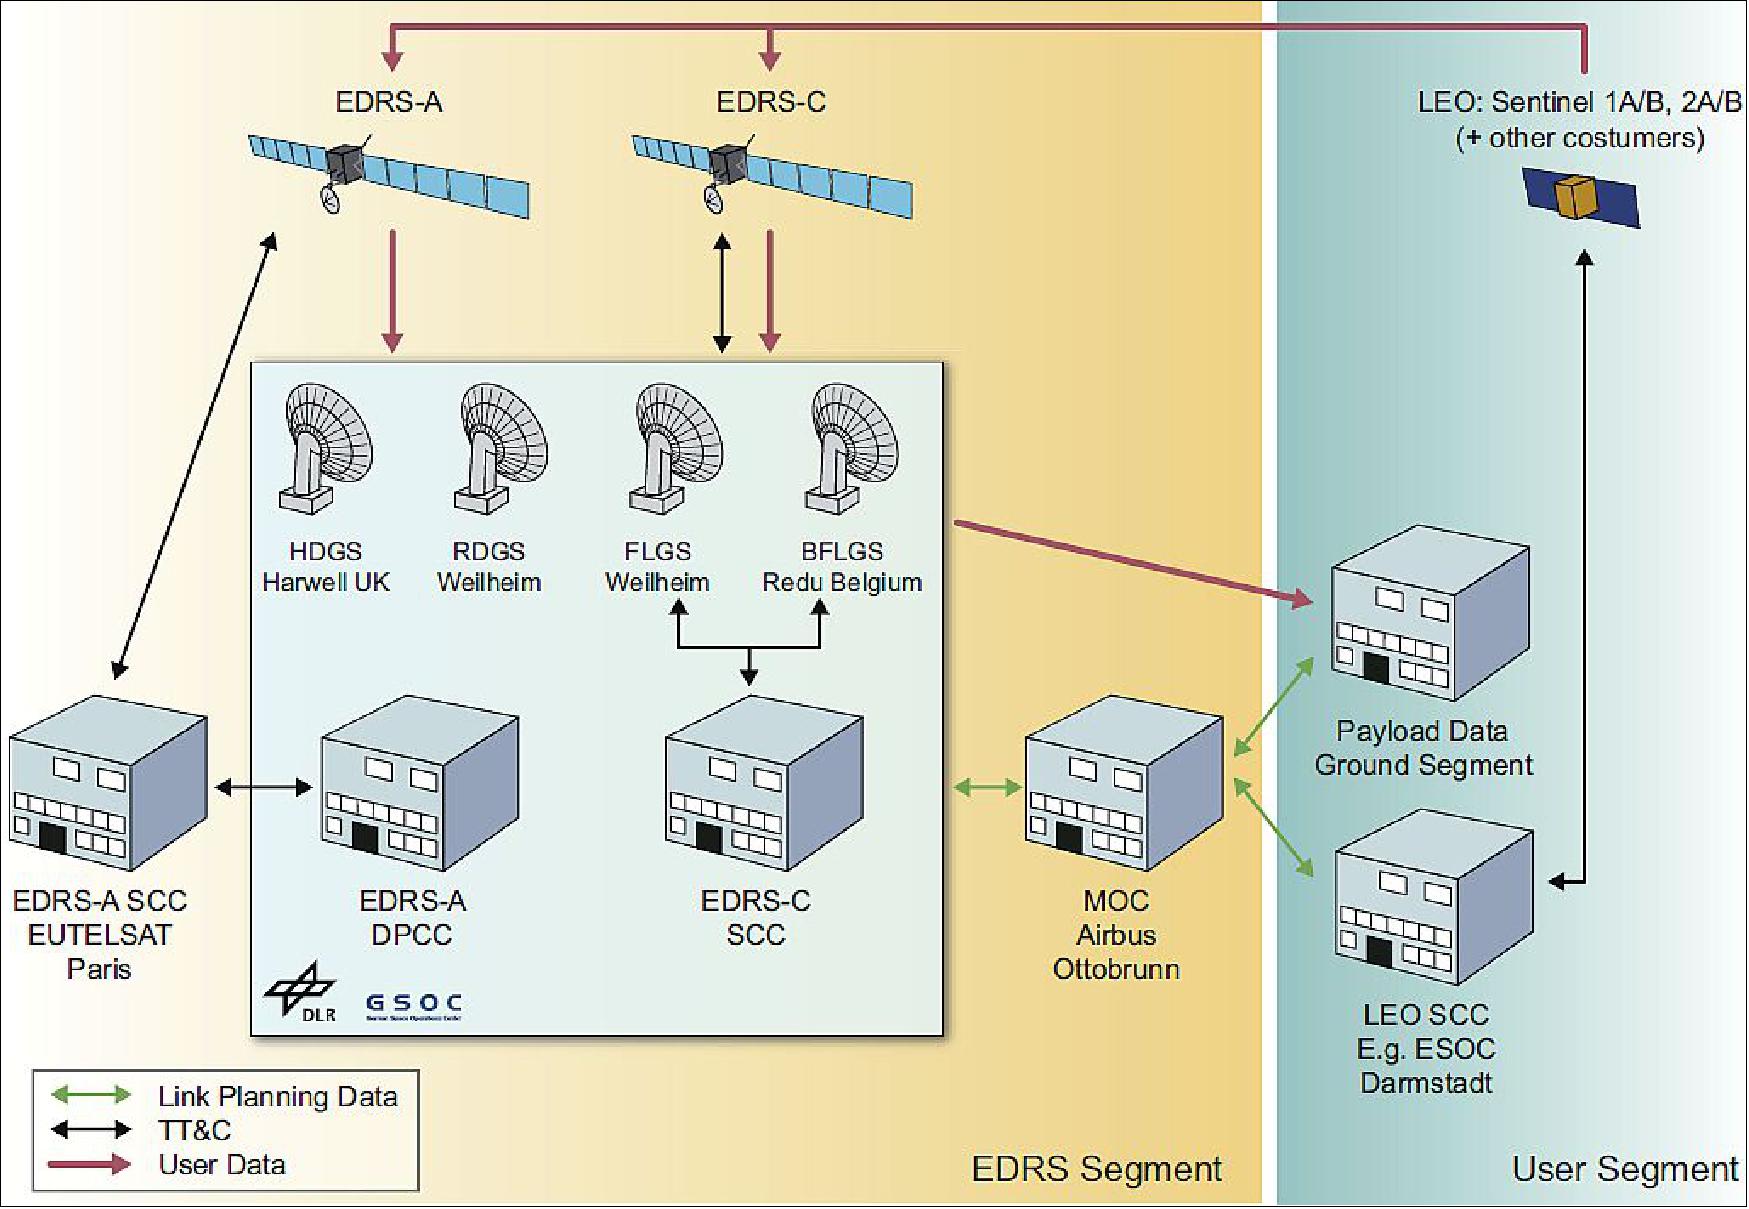 Figure 40: Overview of the EDRS ground segment (image credit: DLR)